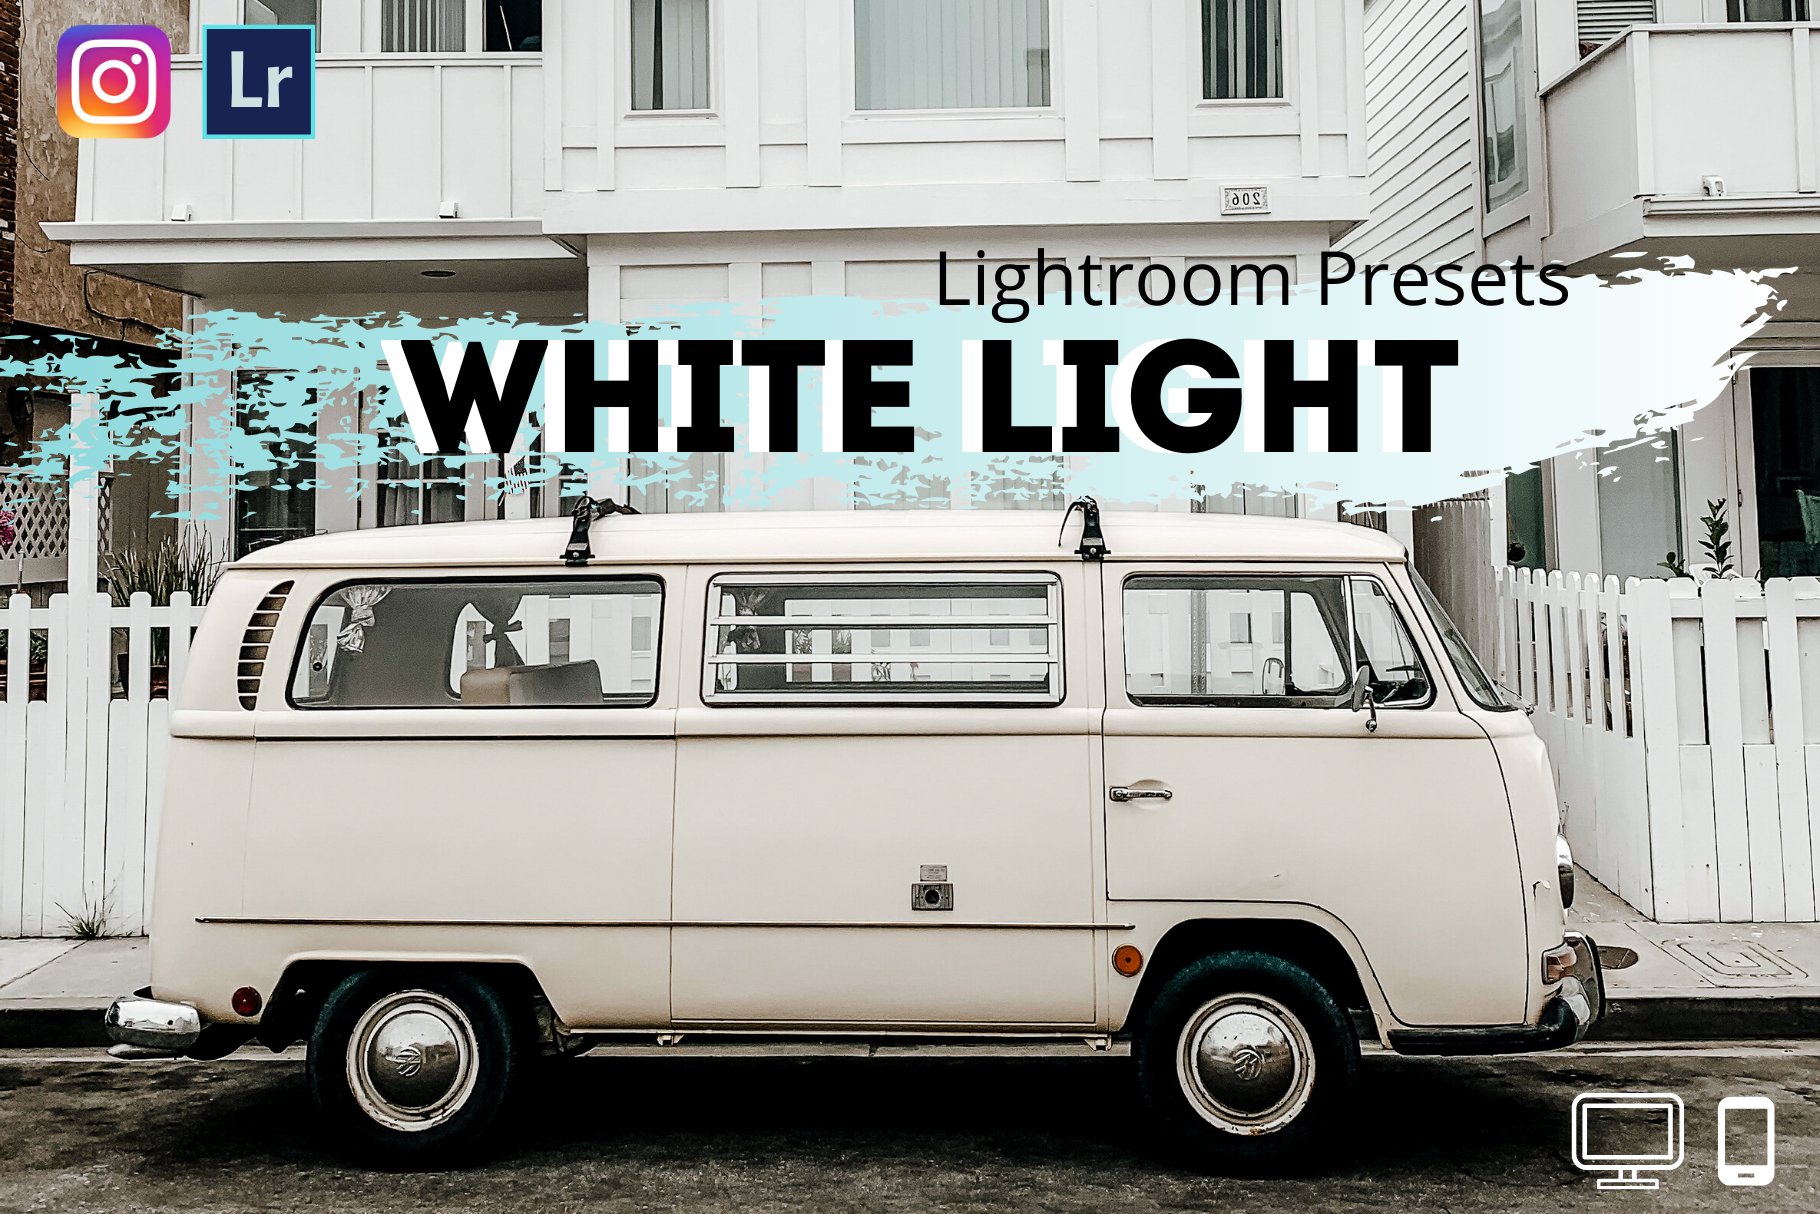 15% Off White Lightroom Presetscover image.